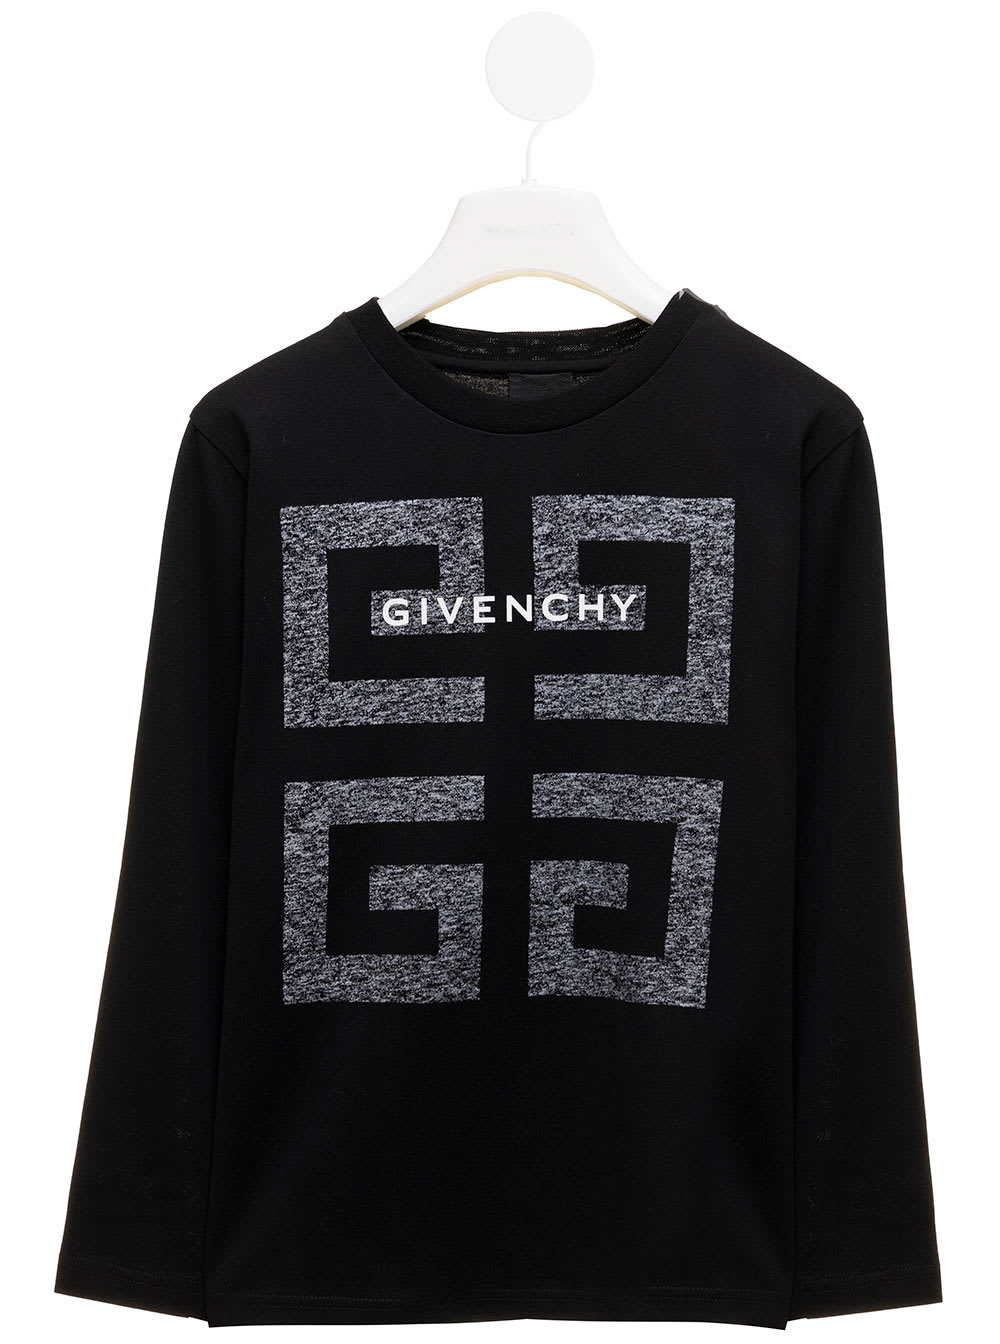 Givenchy Black Cotton Long Sleeved T-shirt With 4g Print Kids Boy